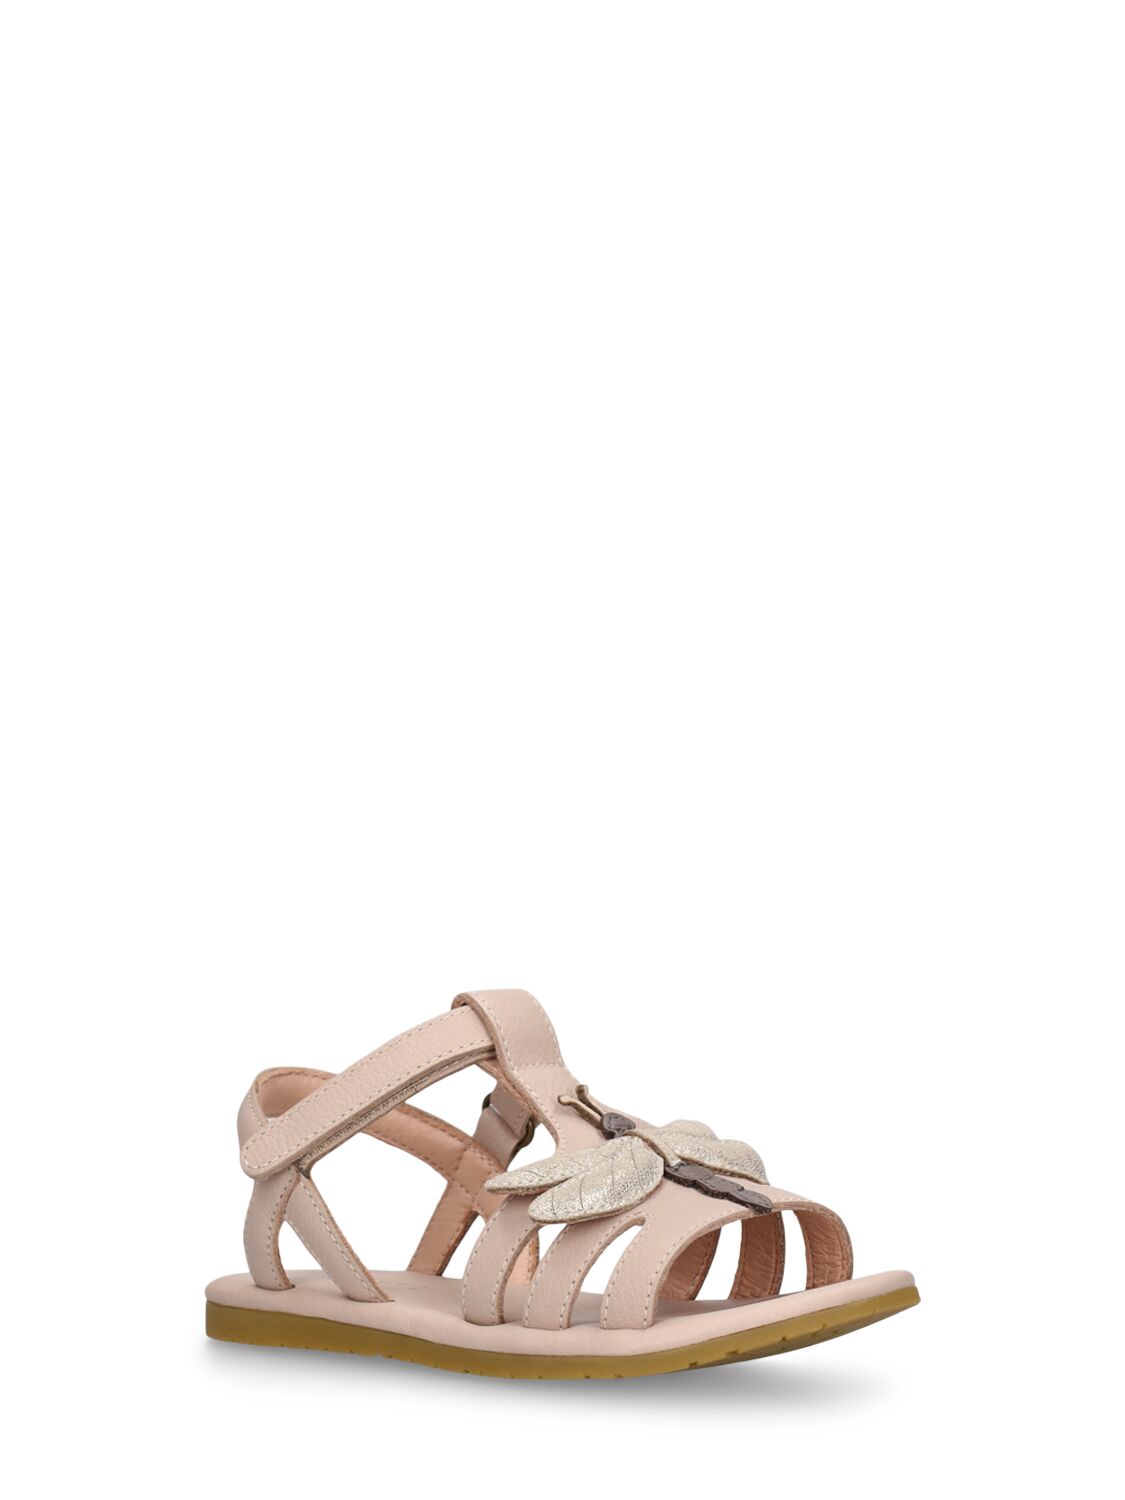 Shop Donsje Leather Sandals W/ Dragonfly Patch In Pink